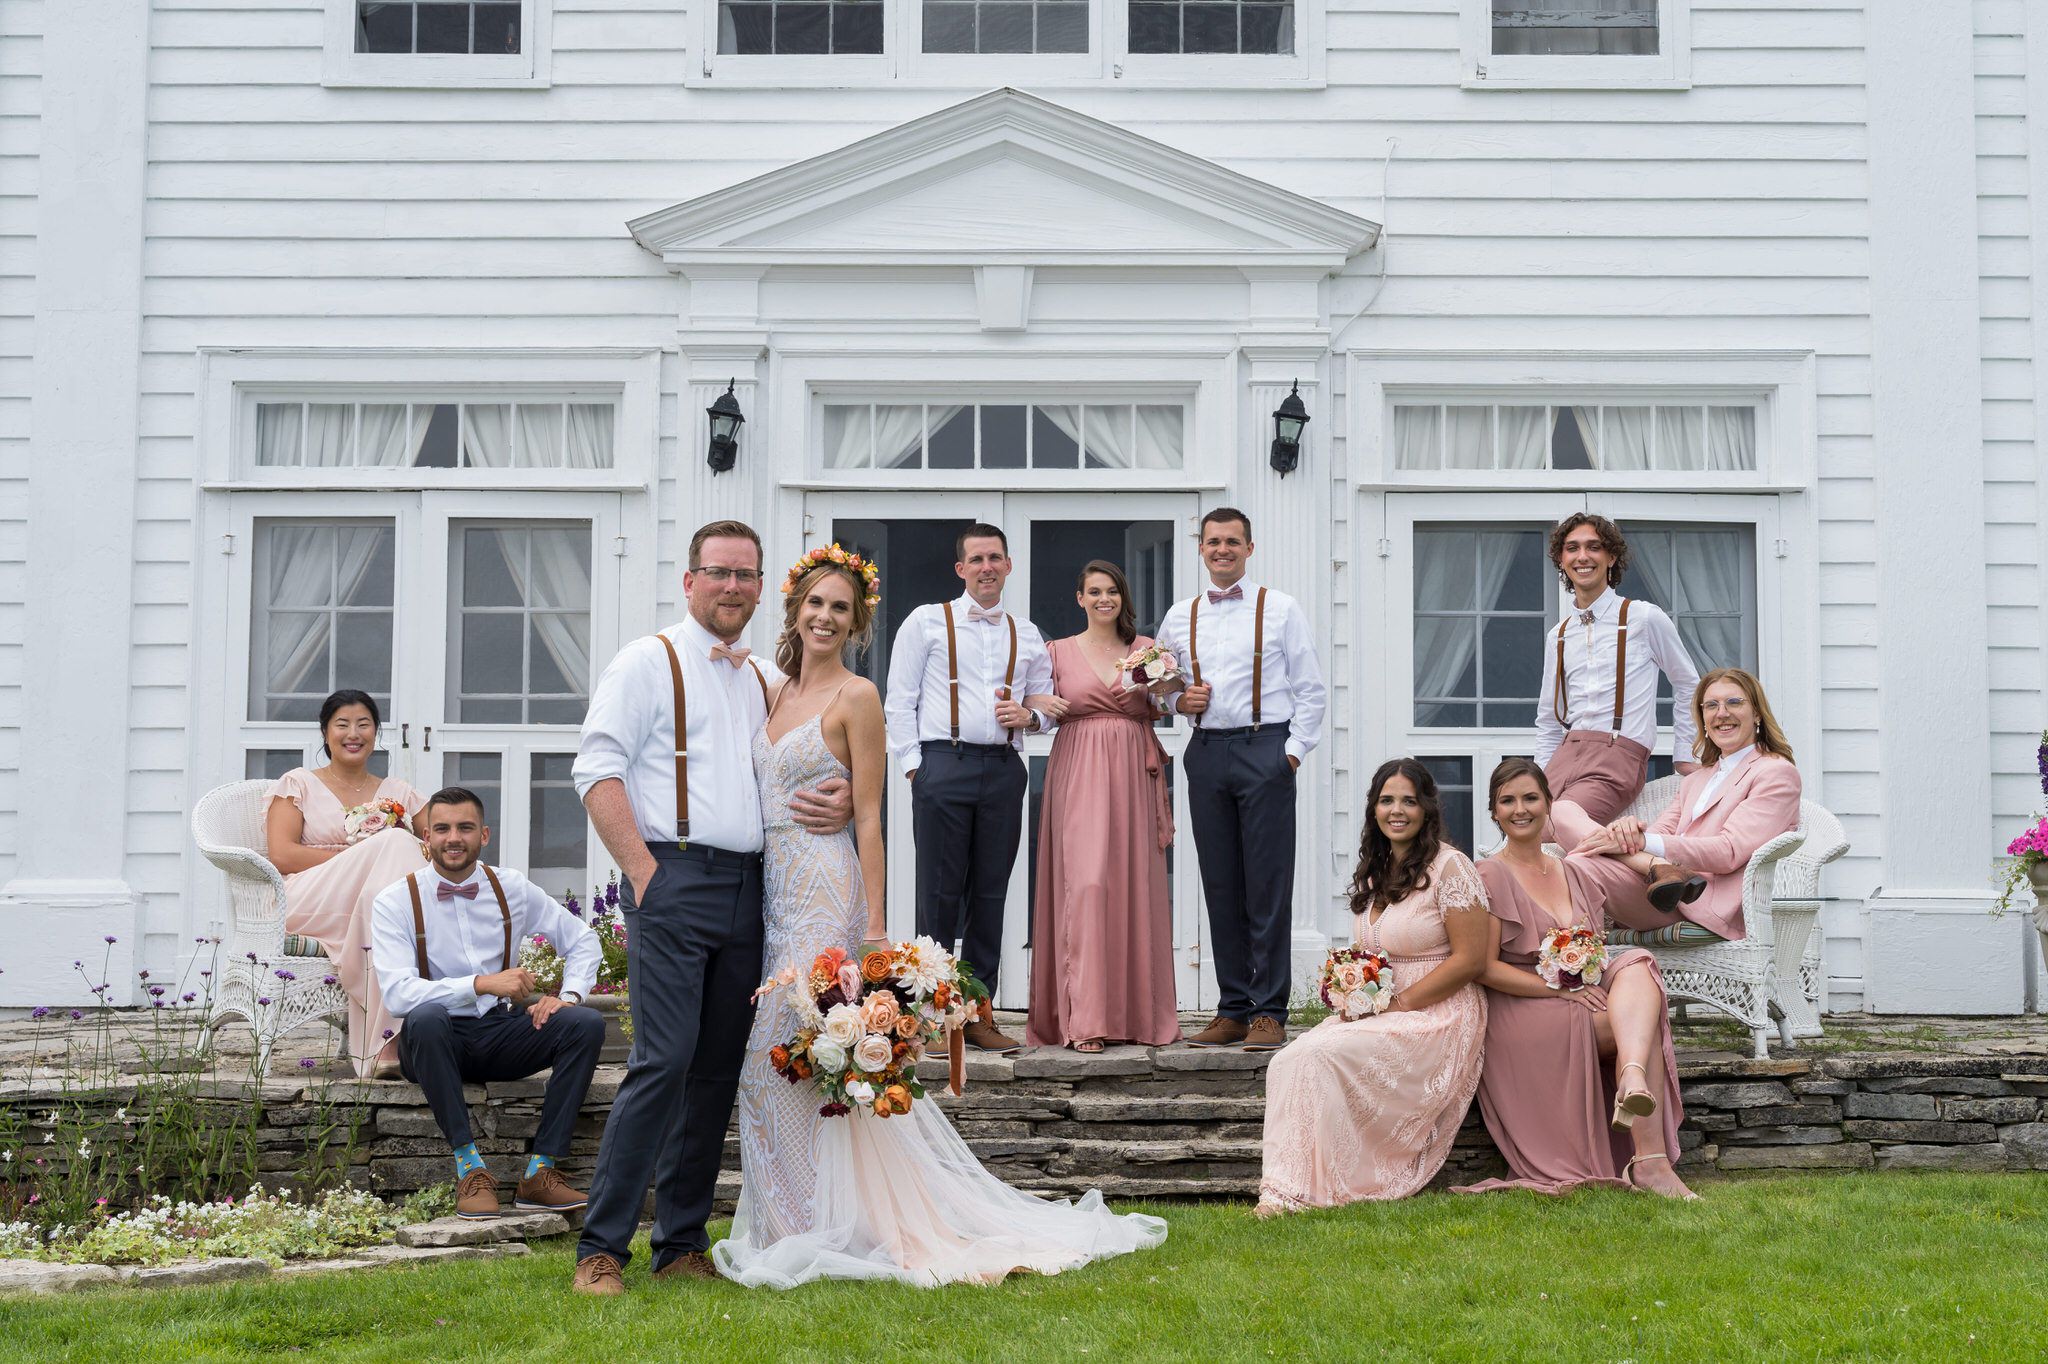 A bridal party poses at Mission Point Resort wedding on Mackinac Island.